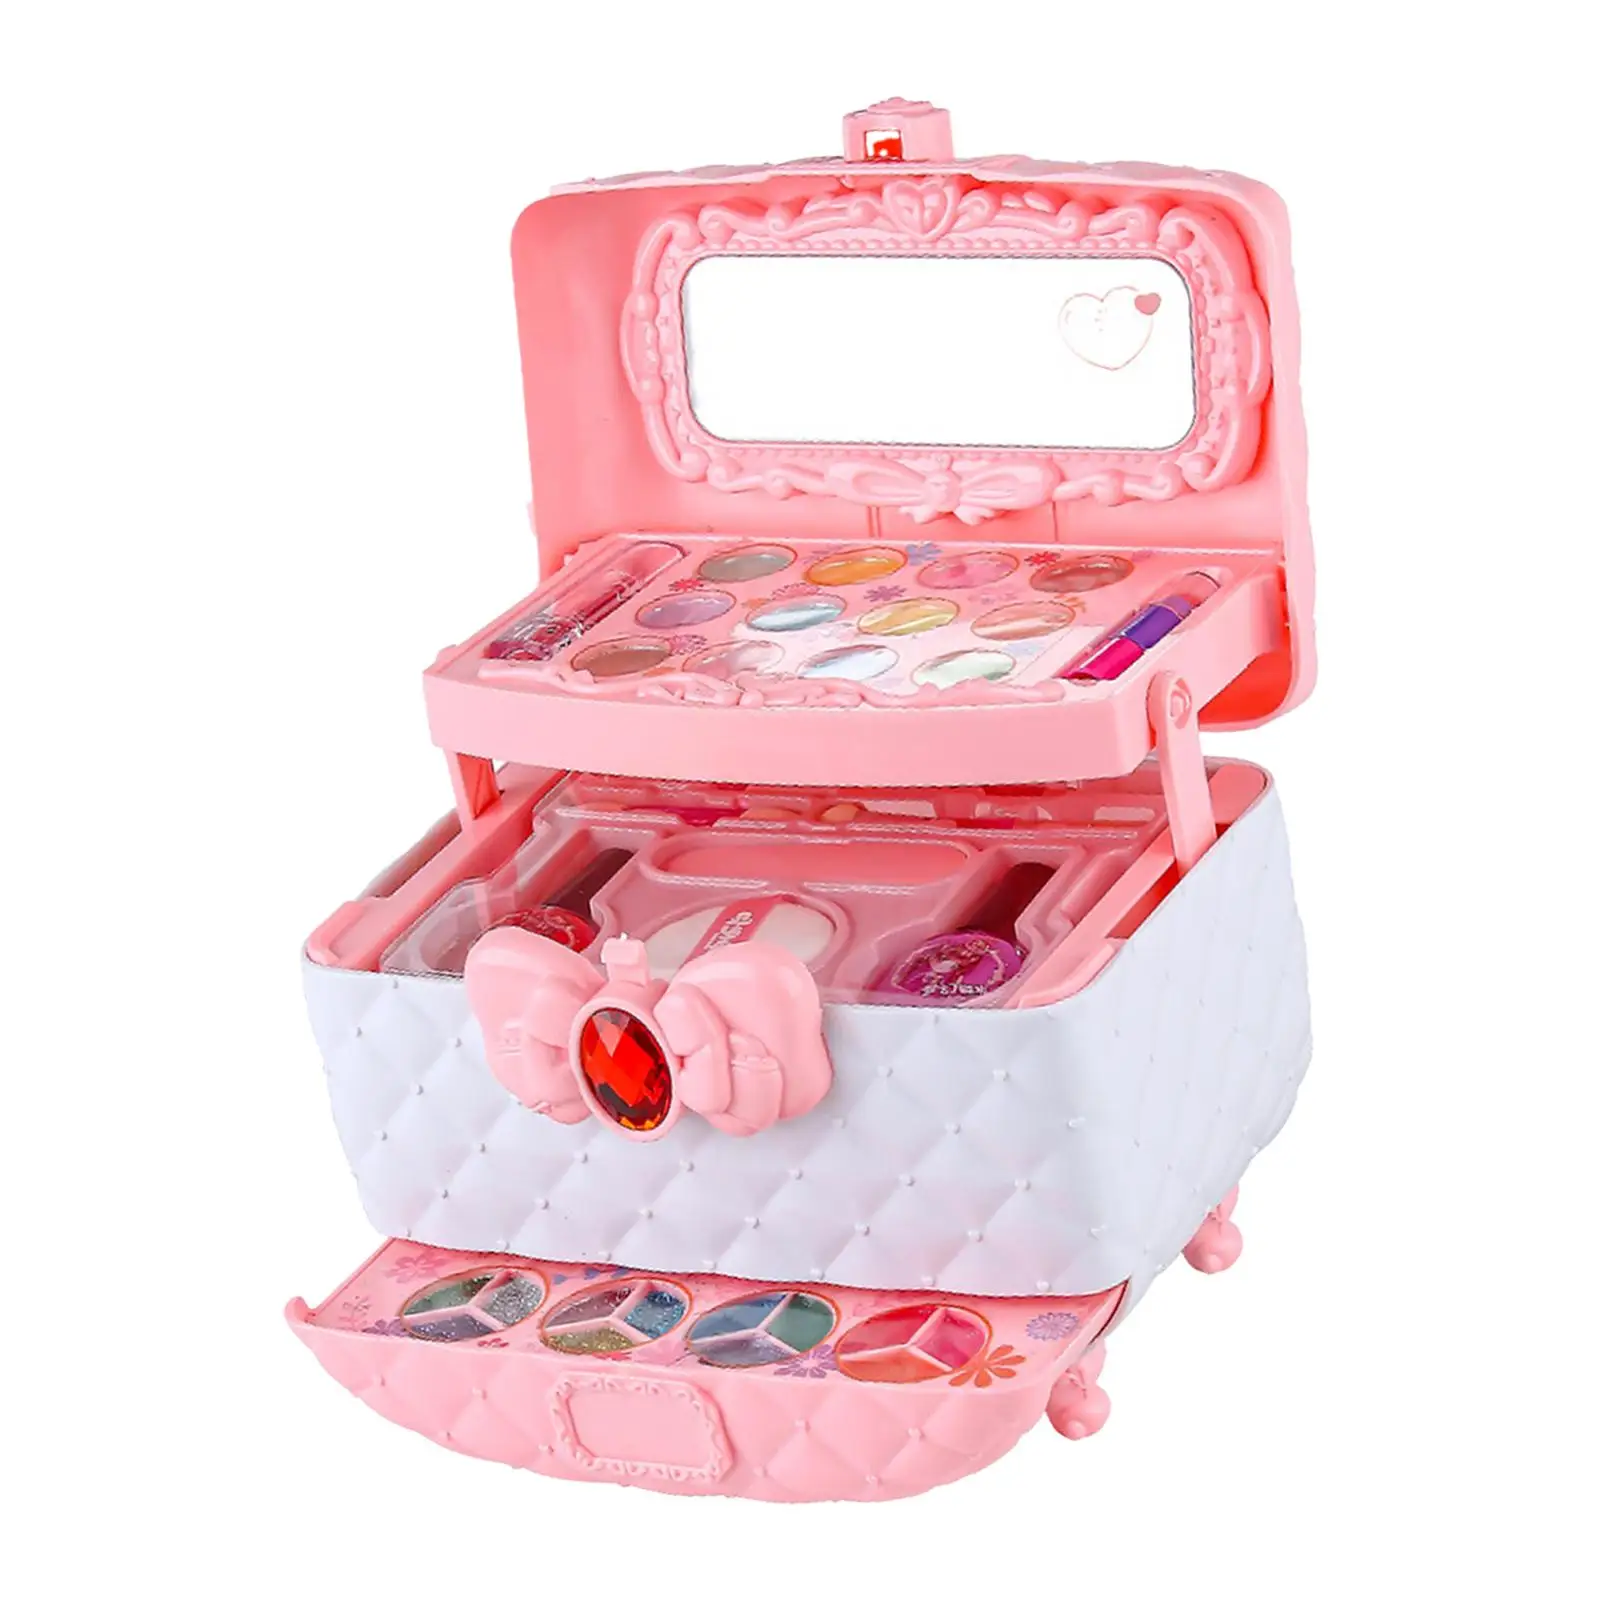 Cosmetic Toy with Mirror Washable Makeup Set Toy for Children Toddlers Gifts